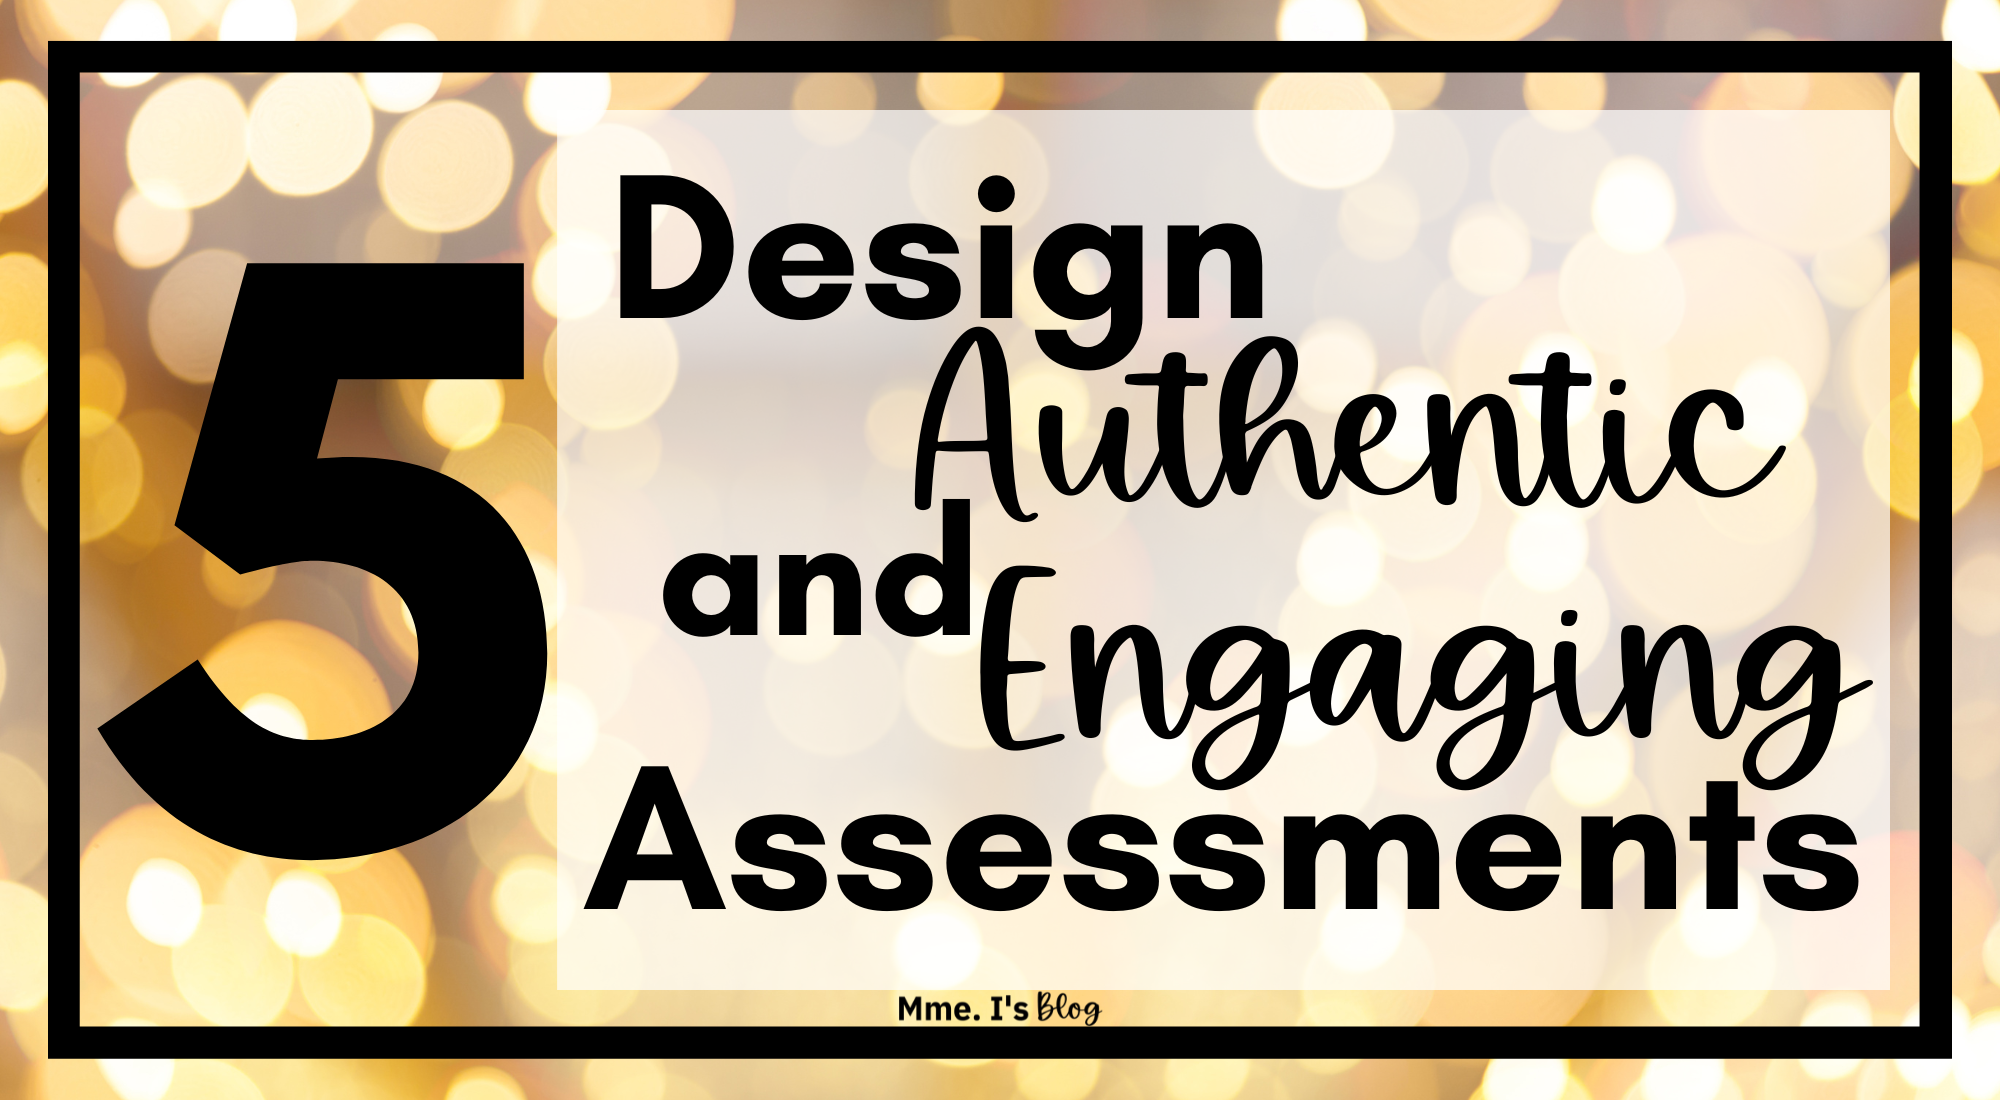 Design Authentic and Engaging Assessments